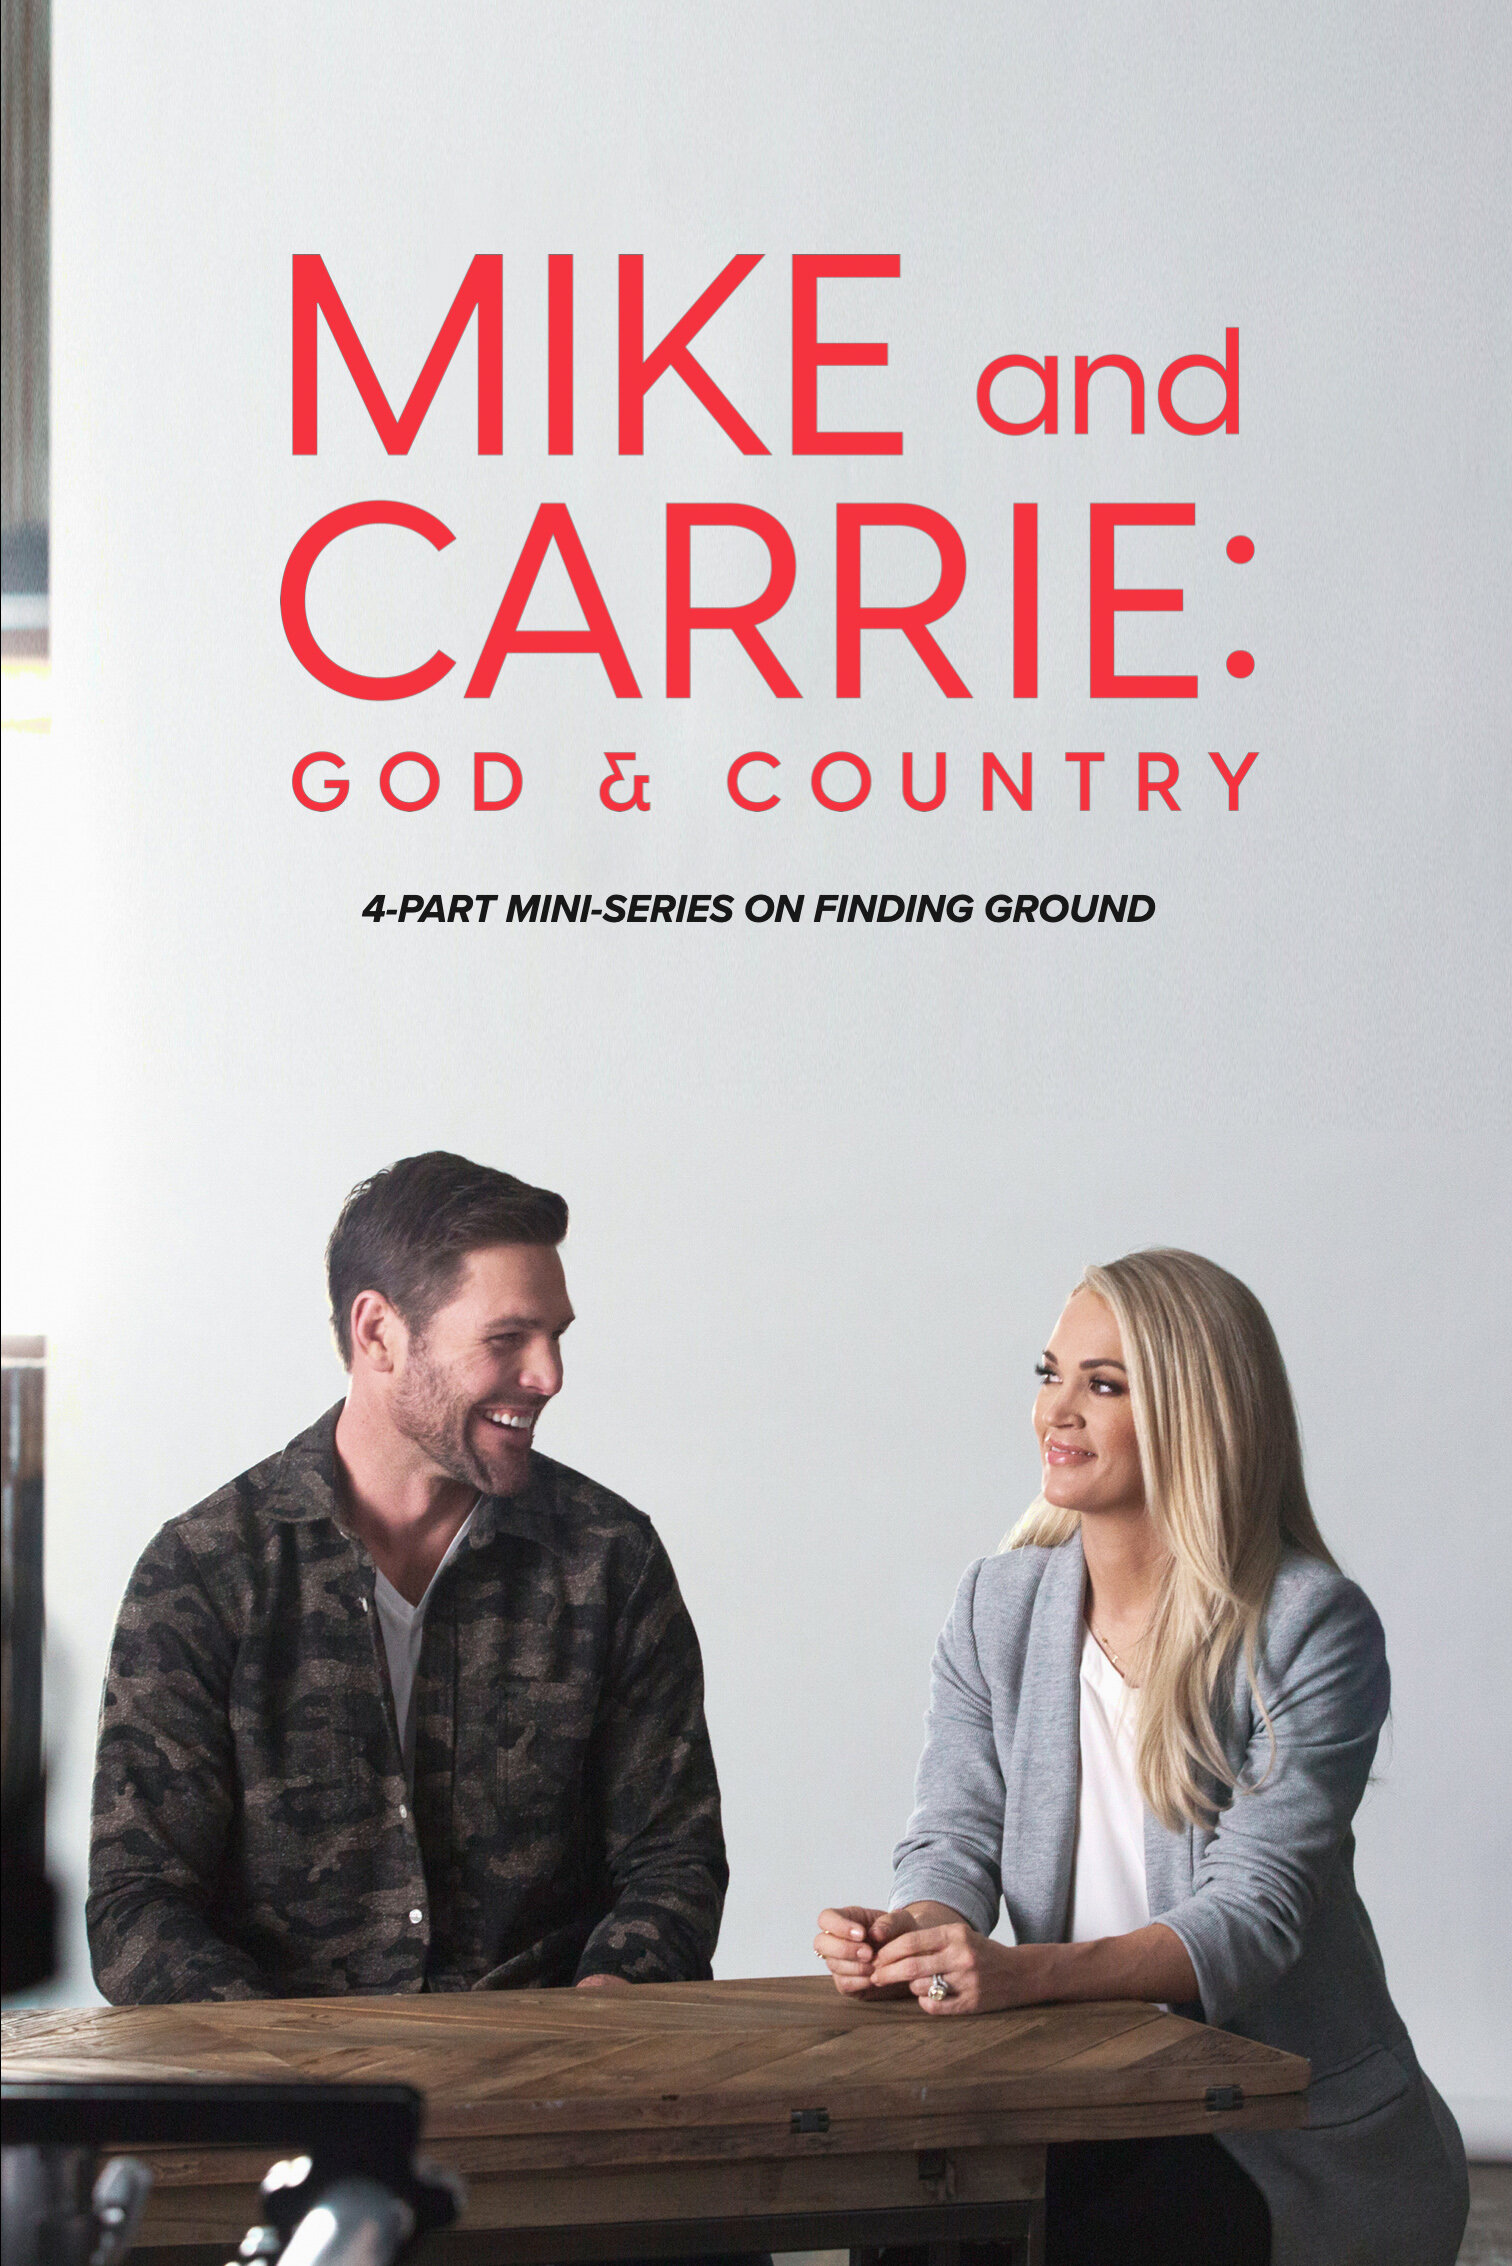 MIKE AND CARRIE